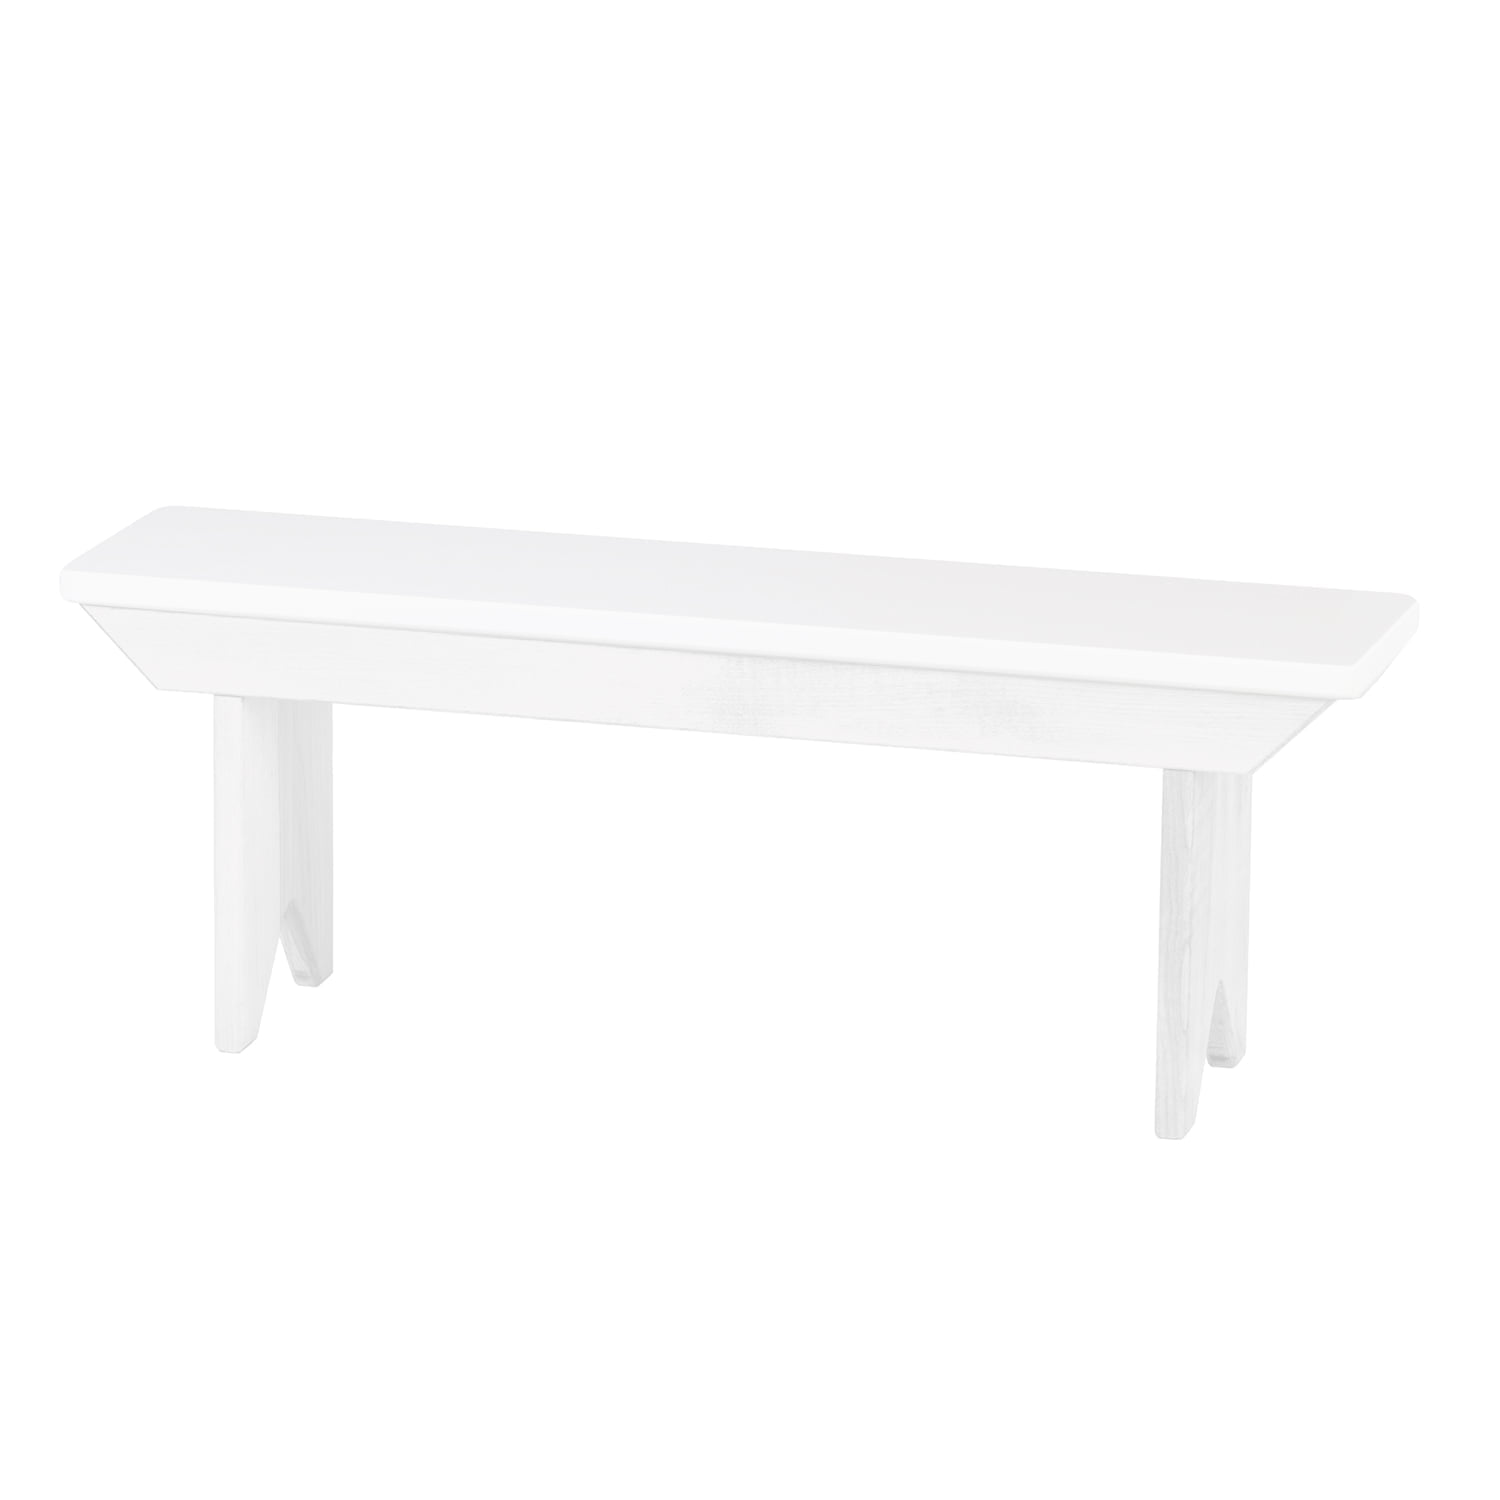 Child's Real Wood Bench - White